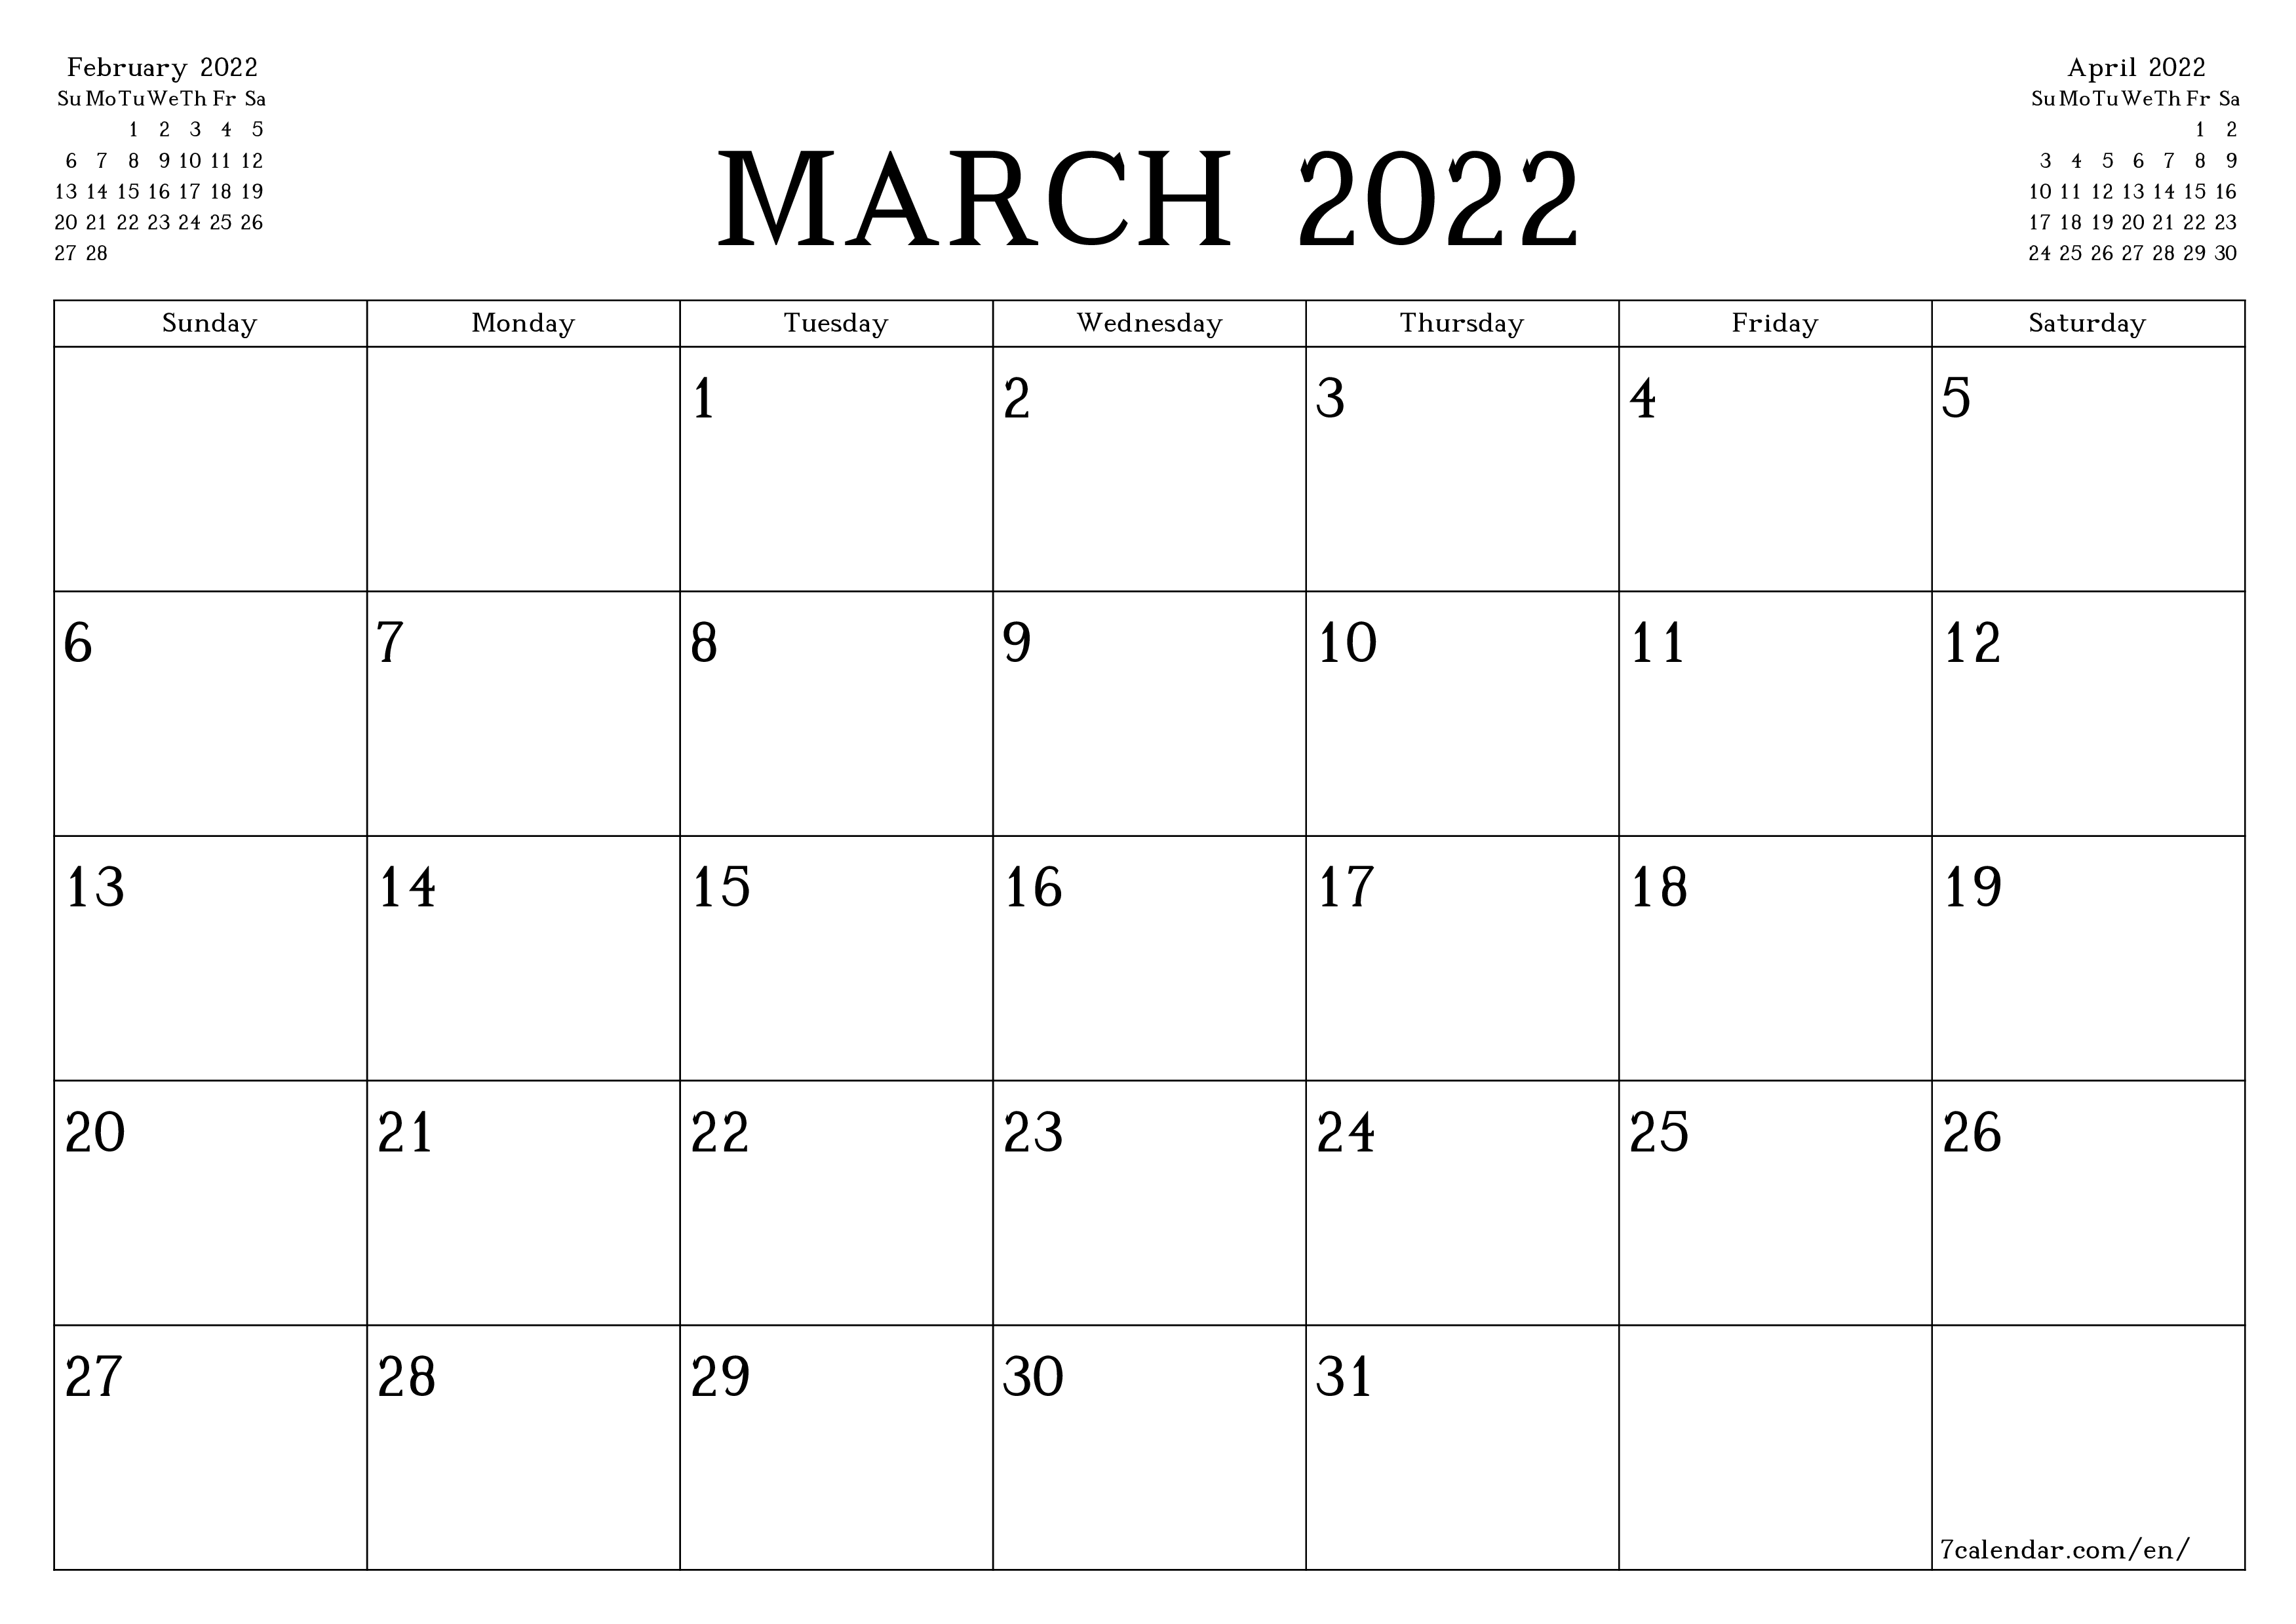 Printable Calendar 2022 March March 2022 Free Printable Calendars And Planners, Pdf Templates - 7Calendar